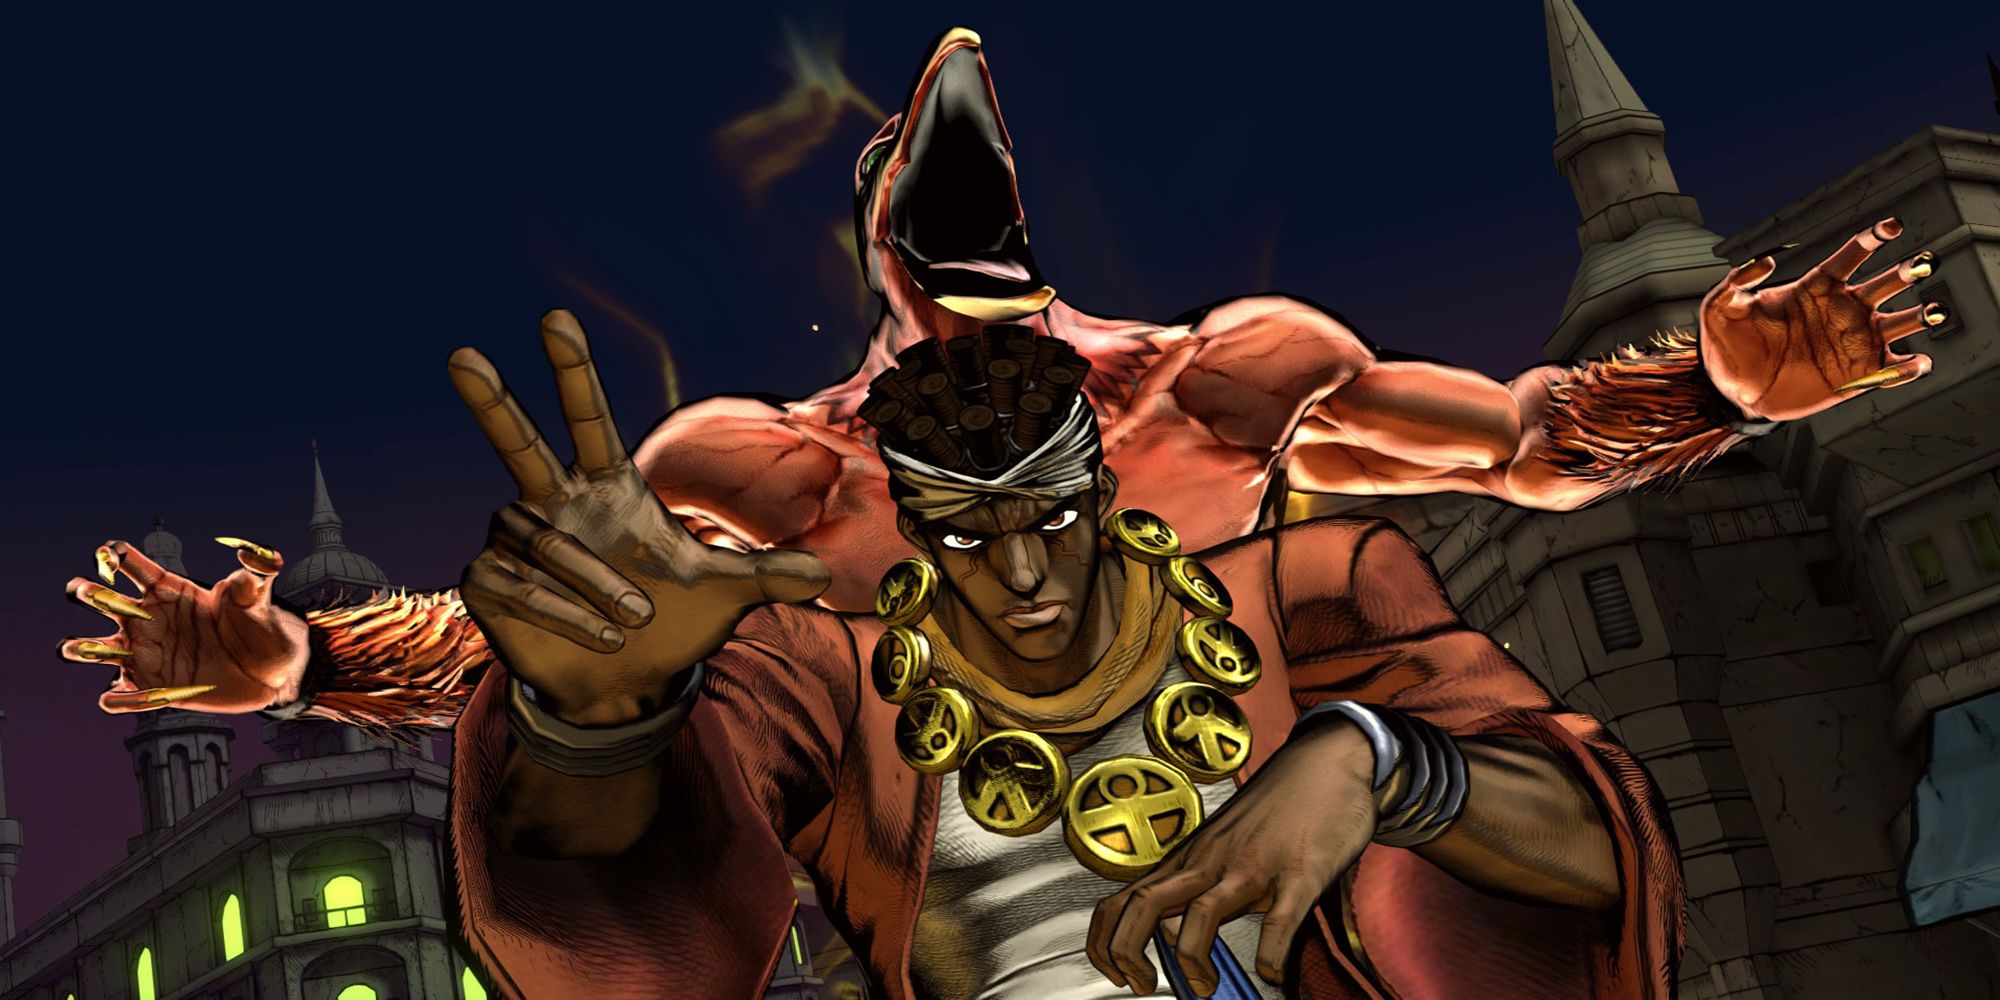 Mohammed Avdol approaches his opponent with Magician's Red in El Cairo City in Jojo's Bizarre Adventure ASBR.